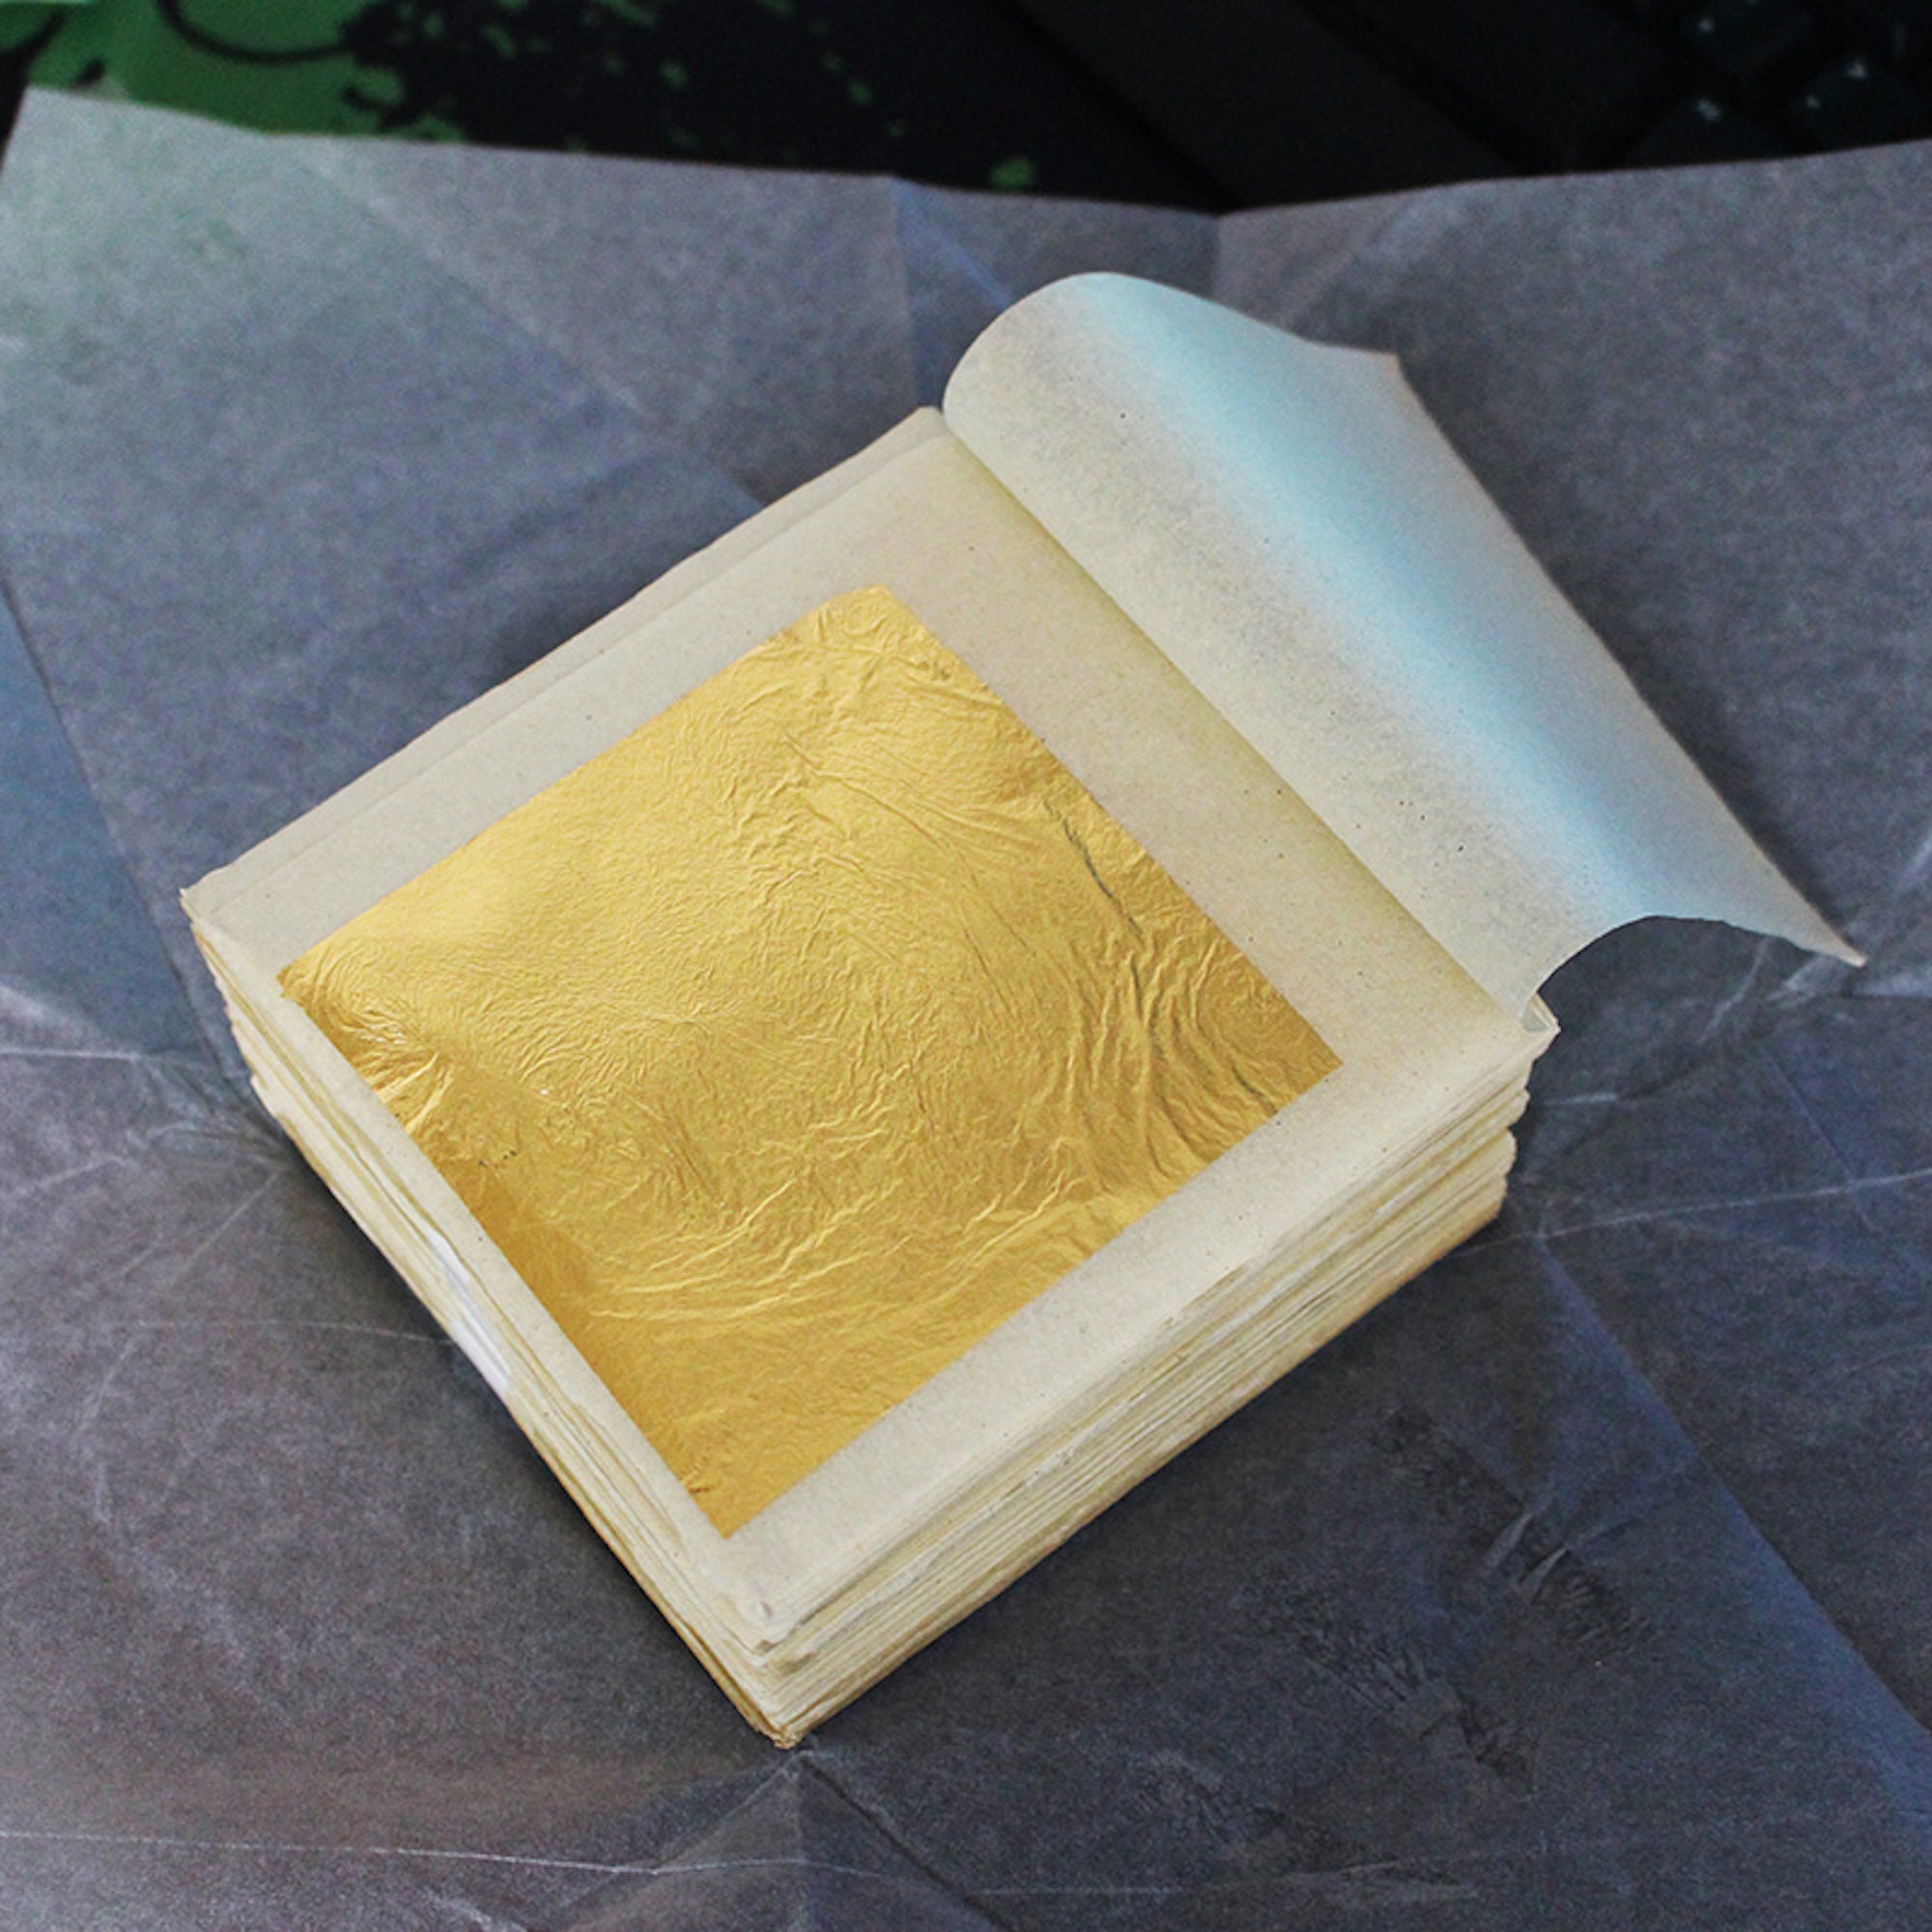 L.A. Gold Leaf 23k Loose Gold Sheets for Cosmetics and Baking 